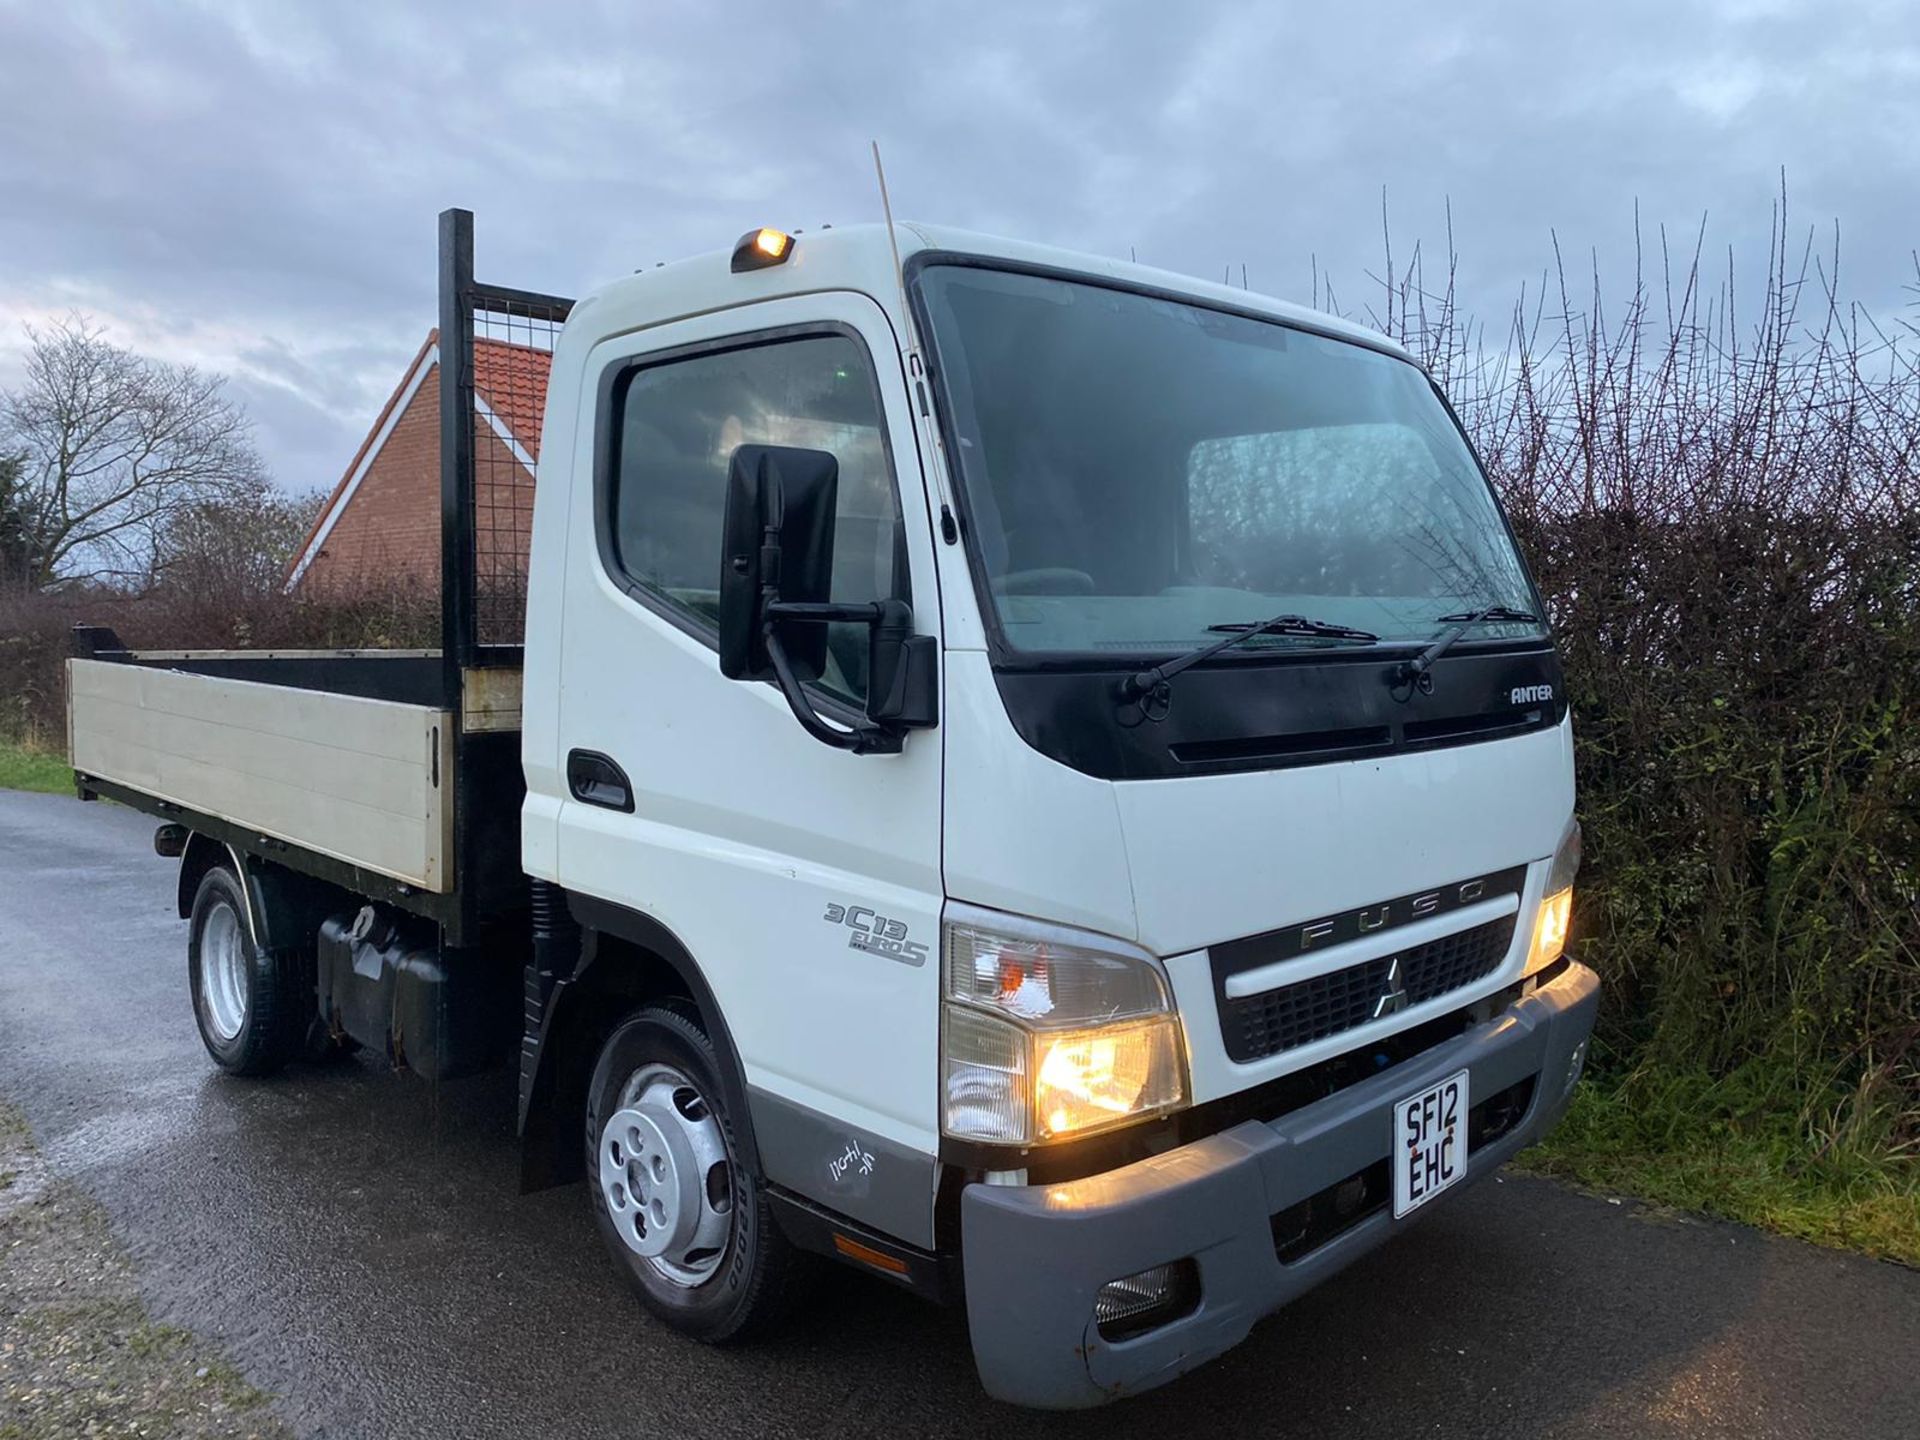 2012/12 REG MITSUBISHI FUSO CANTER 3C13-25 SWB 3.0 DIESEL WHITE TIPPER, SHOWING 0 FORMER KEEPERS